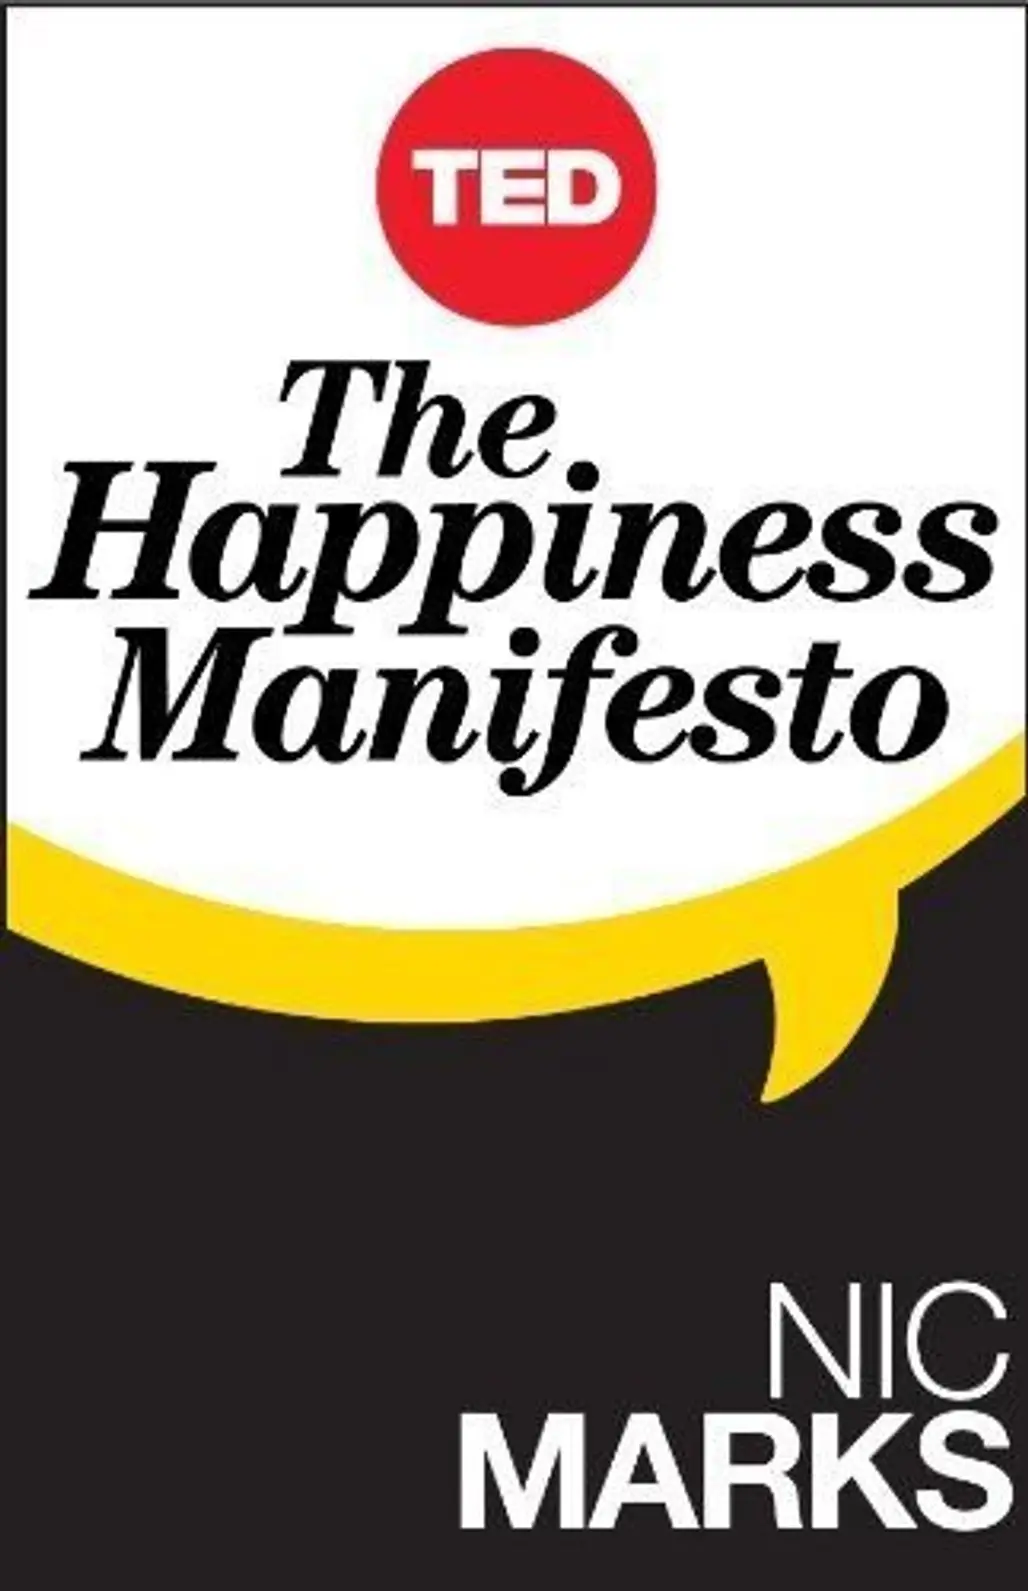 The Happiness Manifesto by Nic Marks